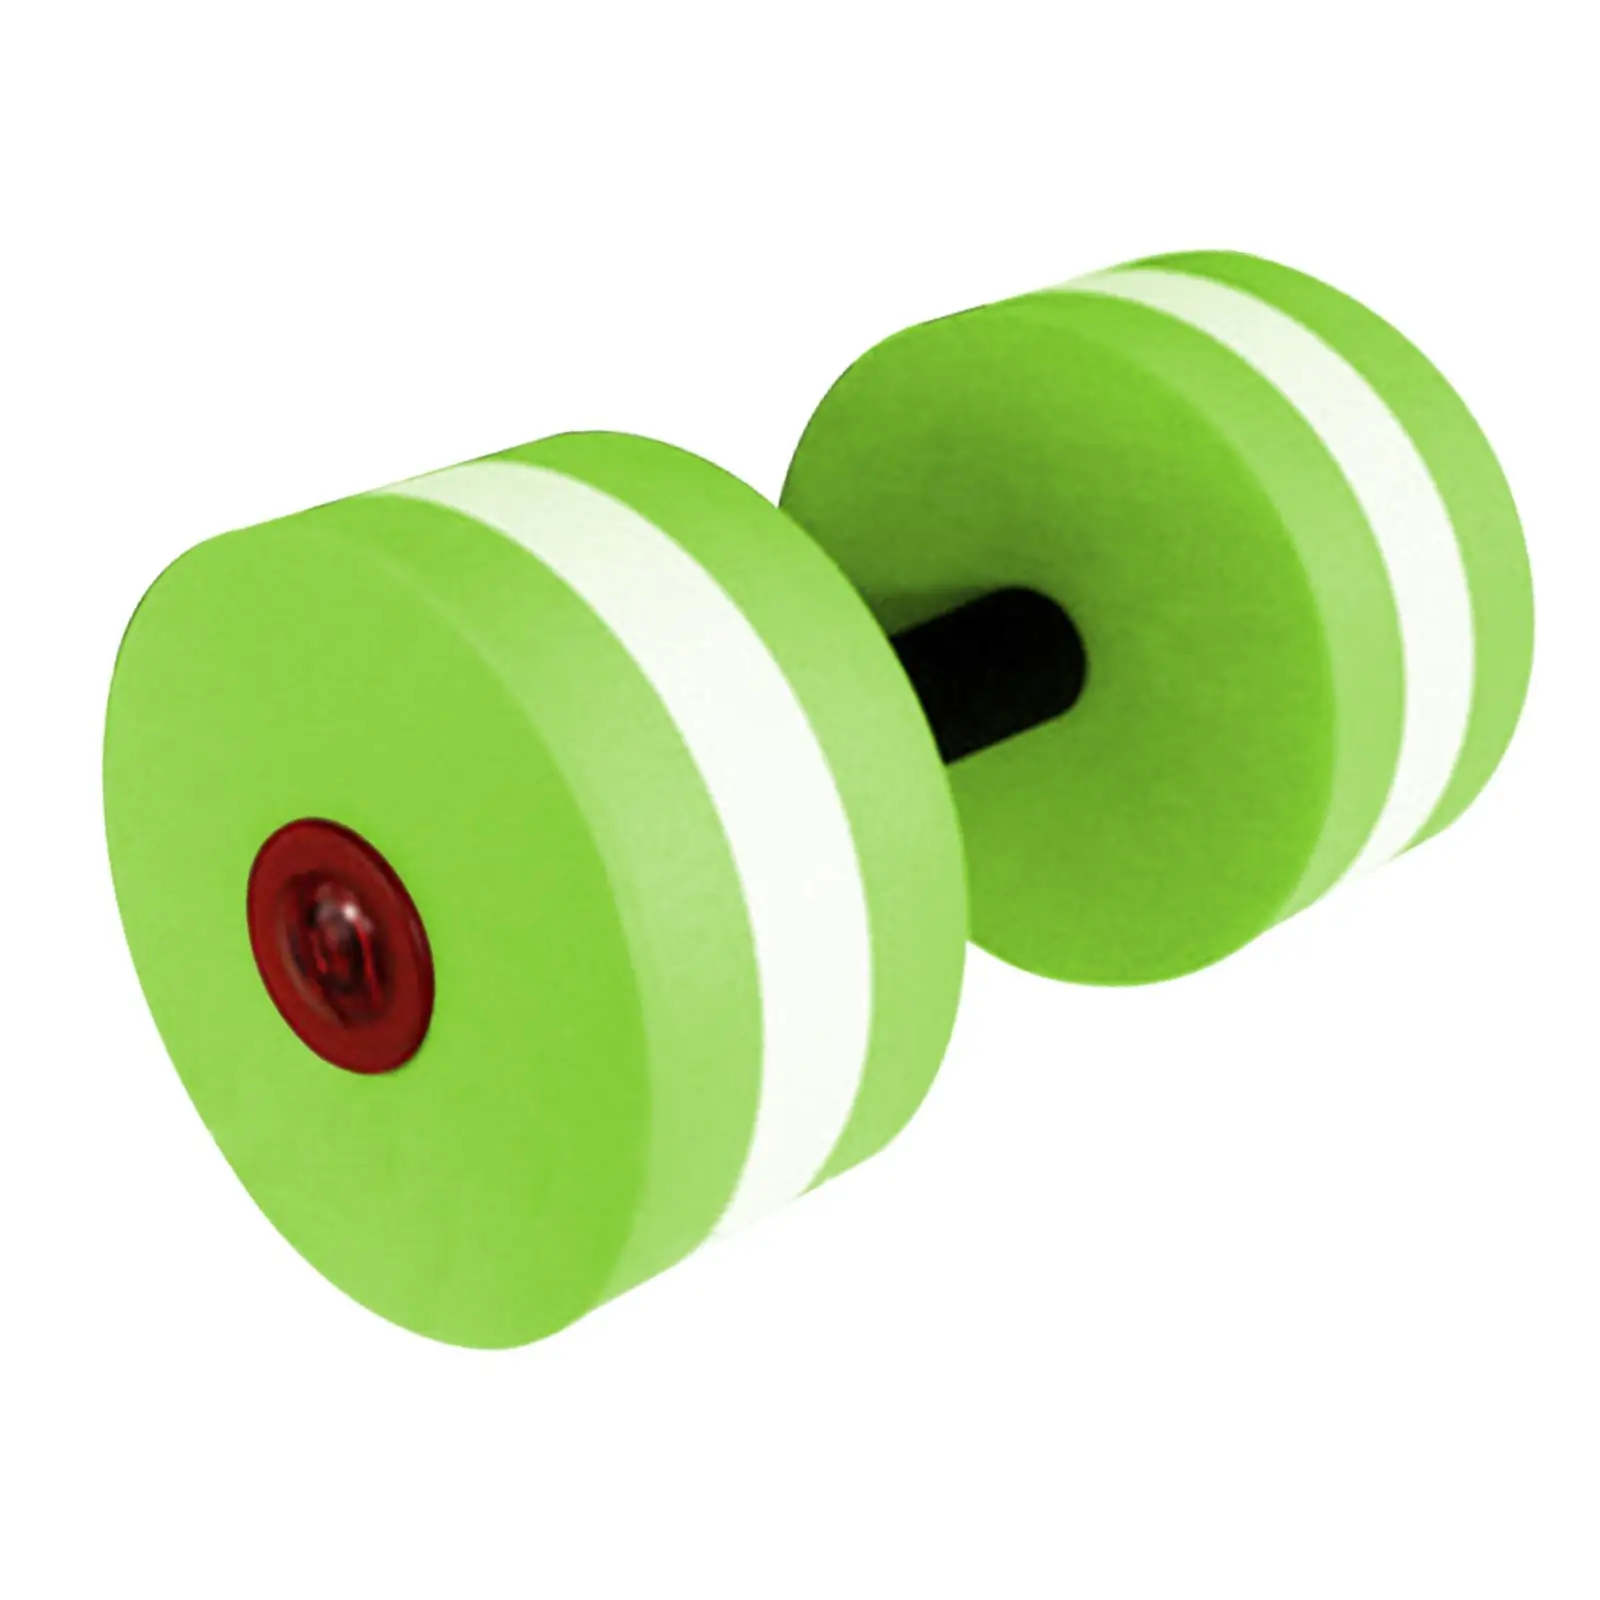 Aquatic Exercise Dumbell, Water Dumbbell Aquatic Barbell Float, for Water Sports